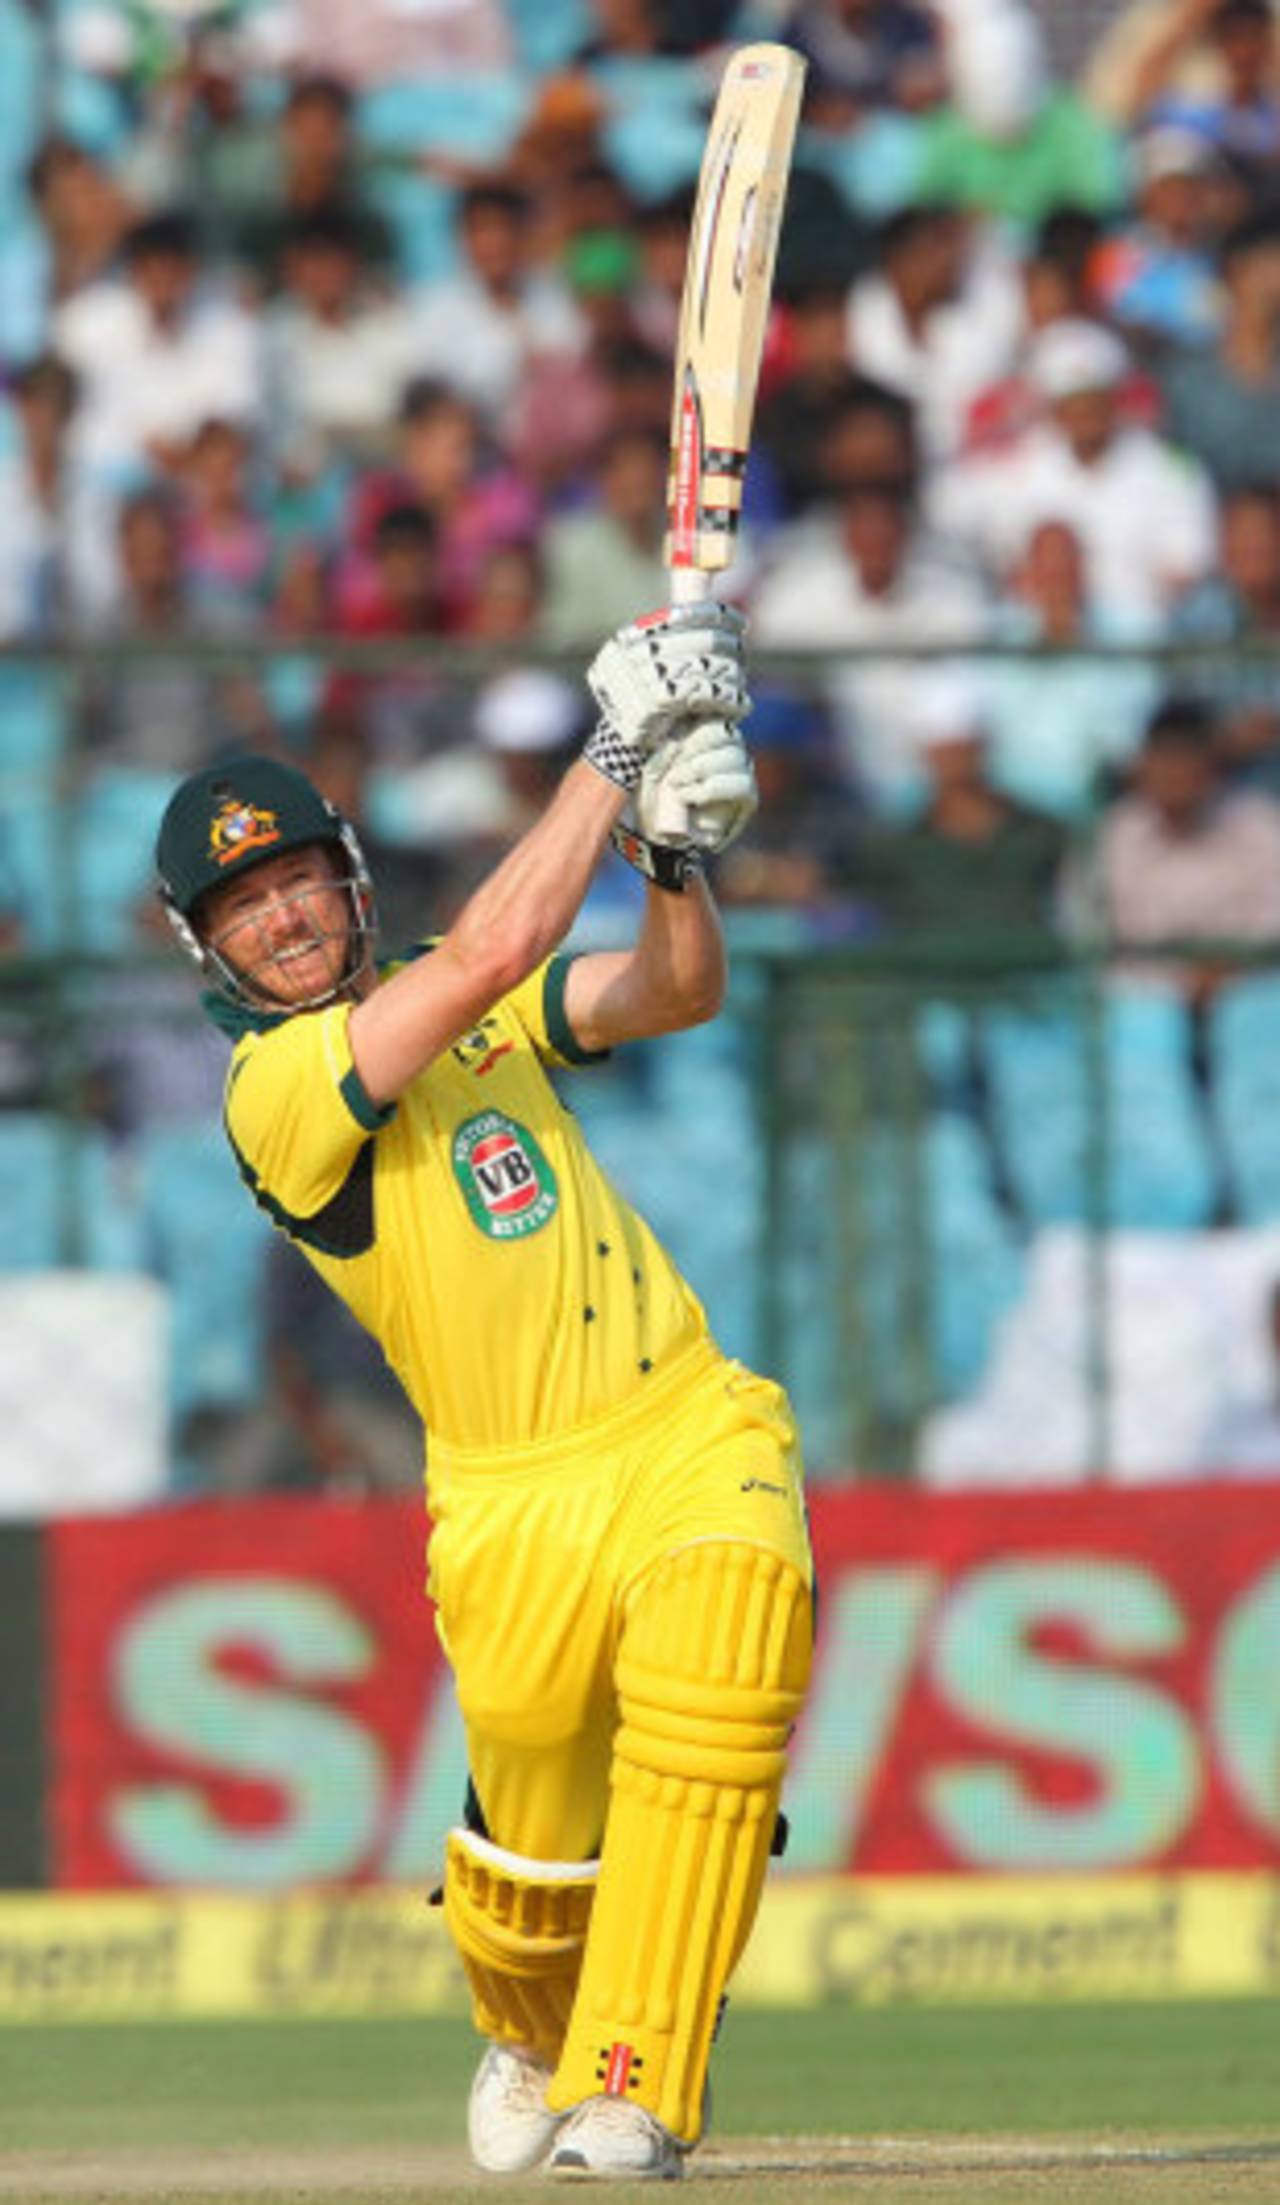 Apart from leading Australia to two victories in the ODI series in India, George Bailey is also their highest run-scorer&nbsp;&nbsp;&bull;&nbsp;&nbsp;BCCI